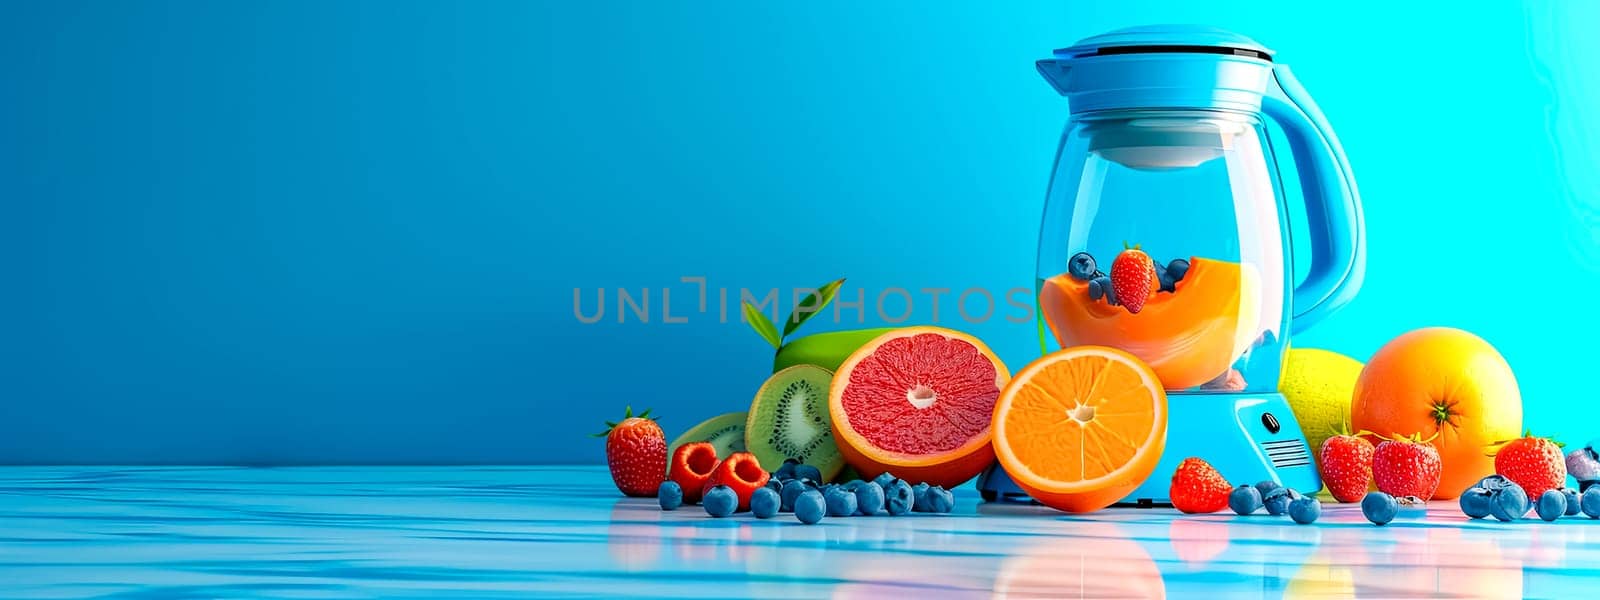 blender surrounded by an array of fresh fruits like oranges, strawberries, kiwi, and blueberries on a reflective surface with a bright blue background by Edophoto